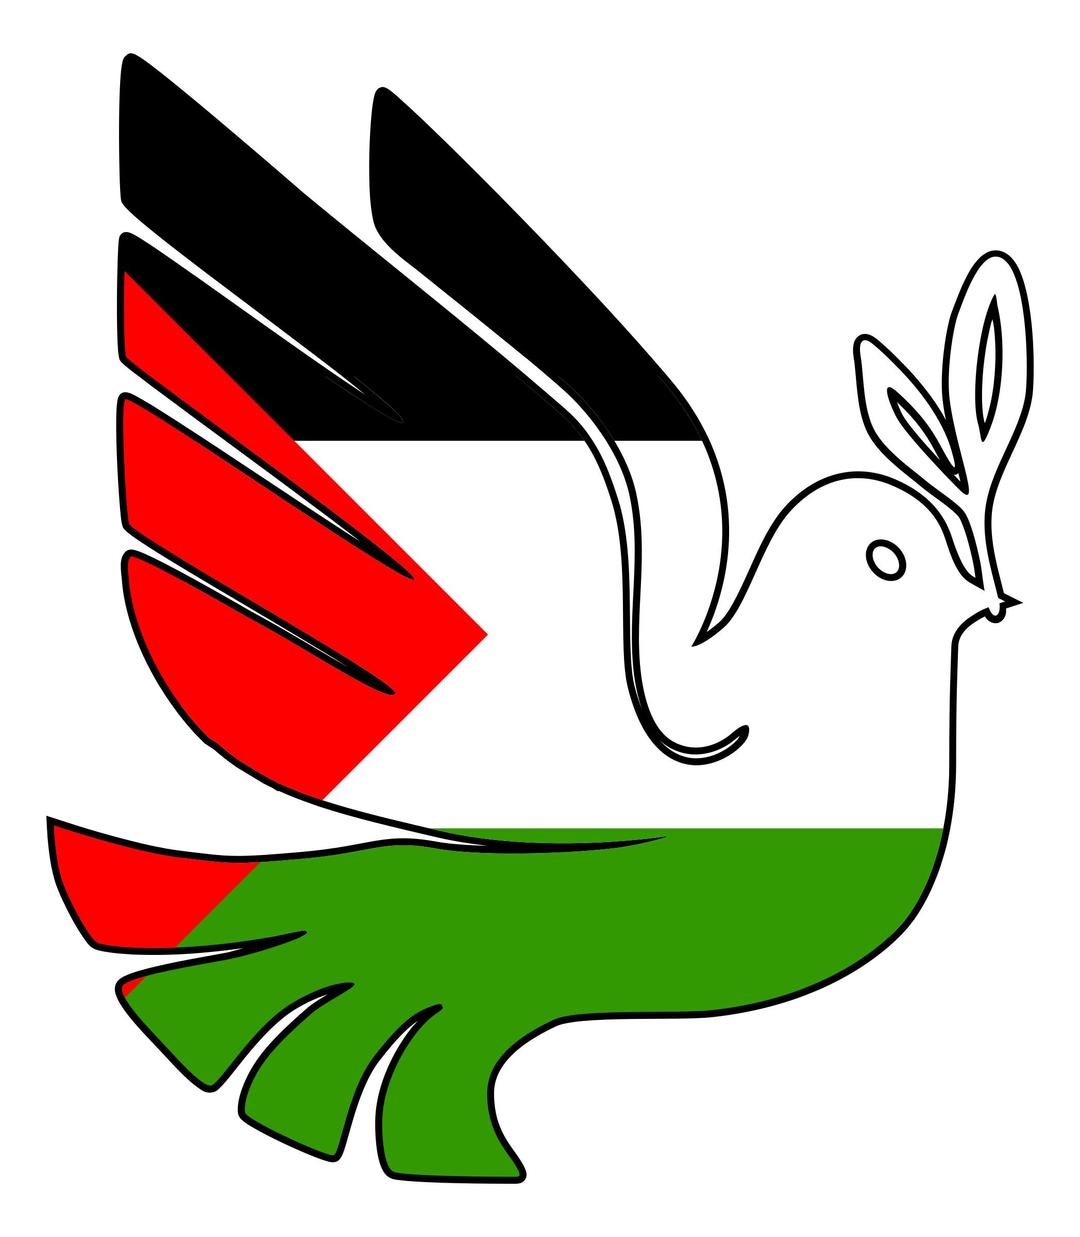 Stop the war - Peace for Palestine png transparent